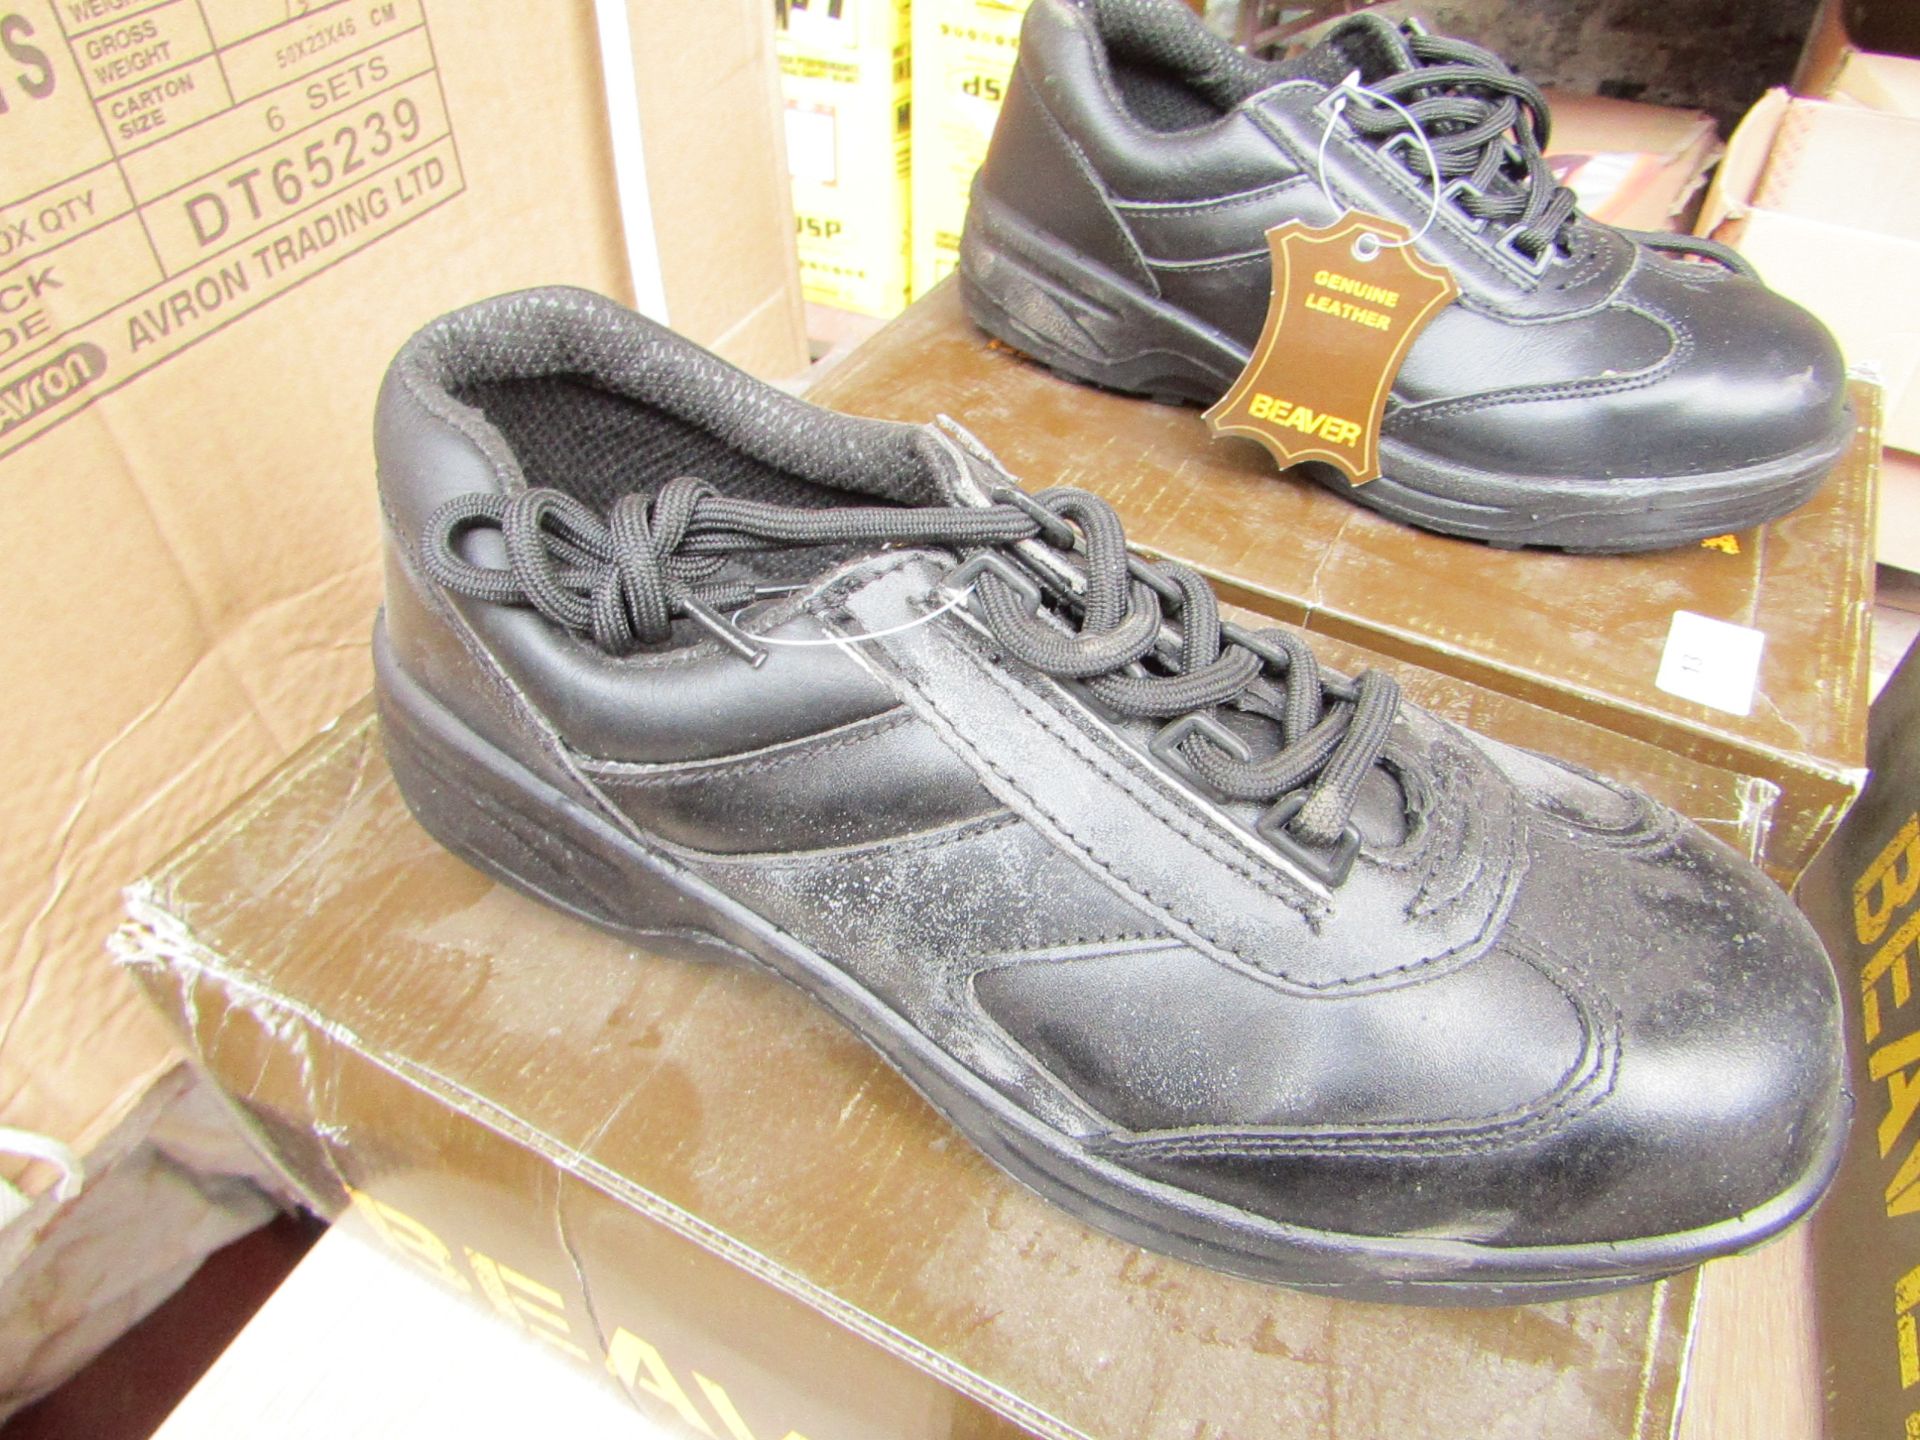 Beaver Genuine Leather safety shoes, unused, size 6, boxed